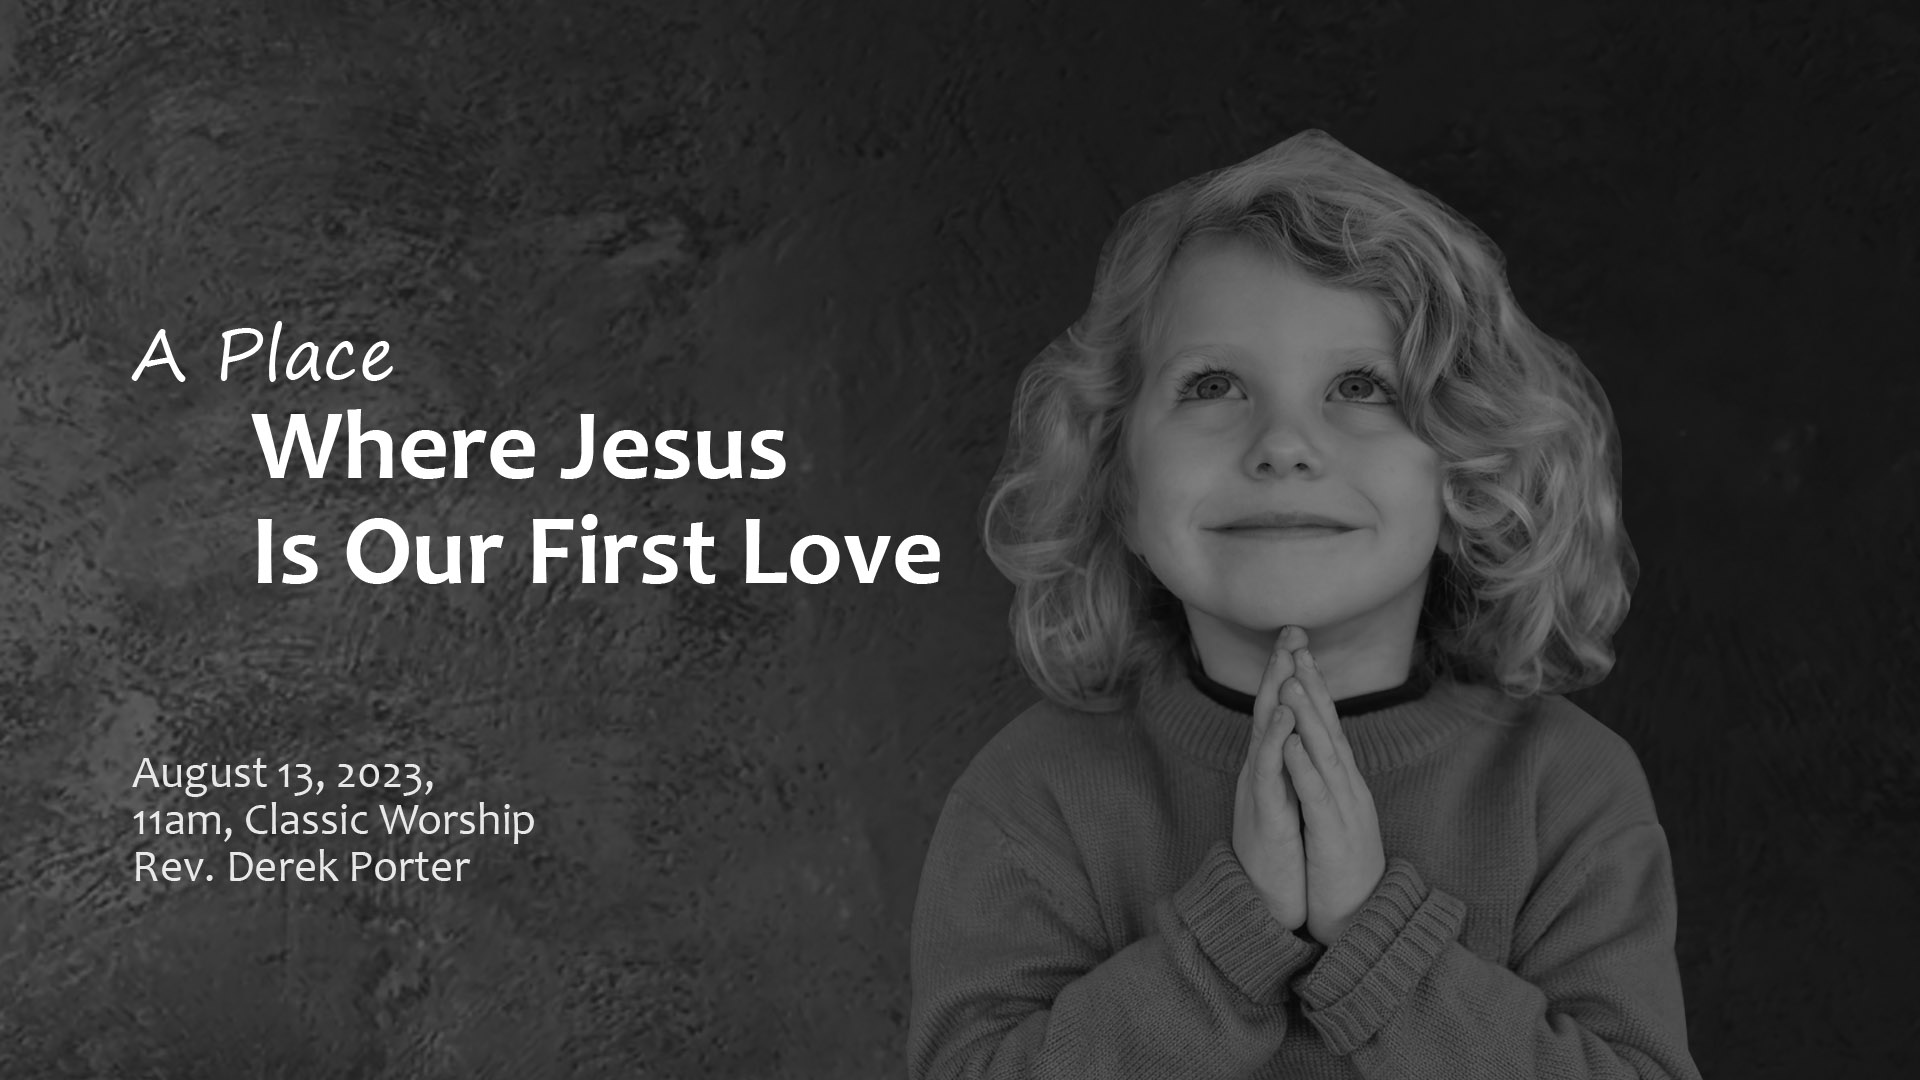 Welcome Home: A Place Where Jesus is Our First Love